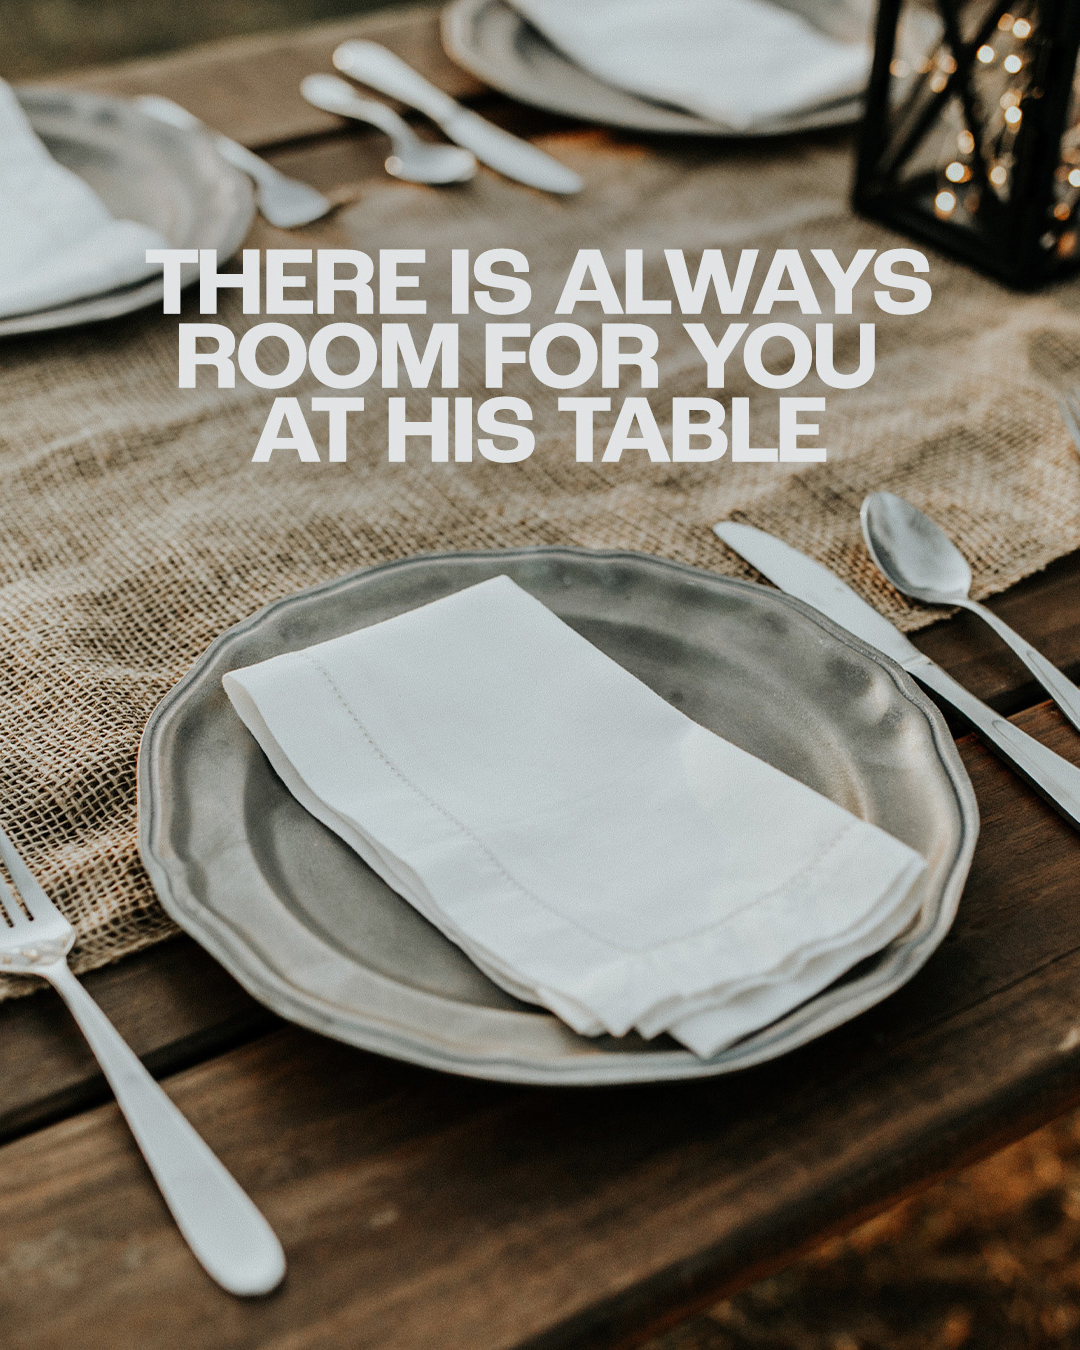 There is always room for you at His table